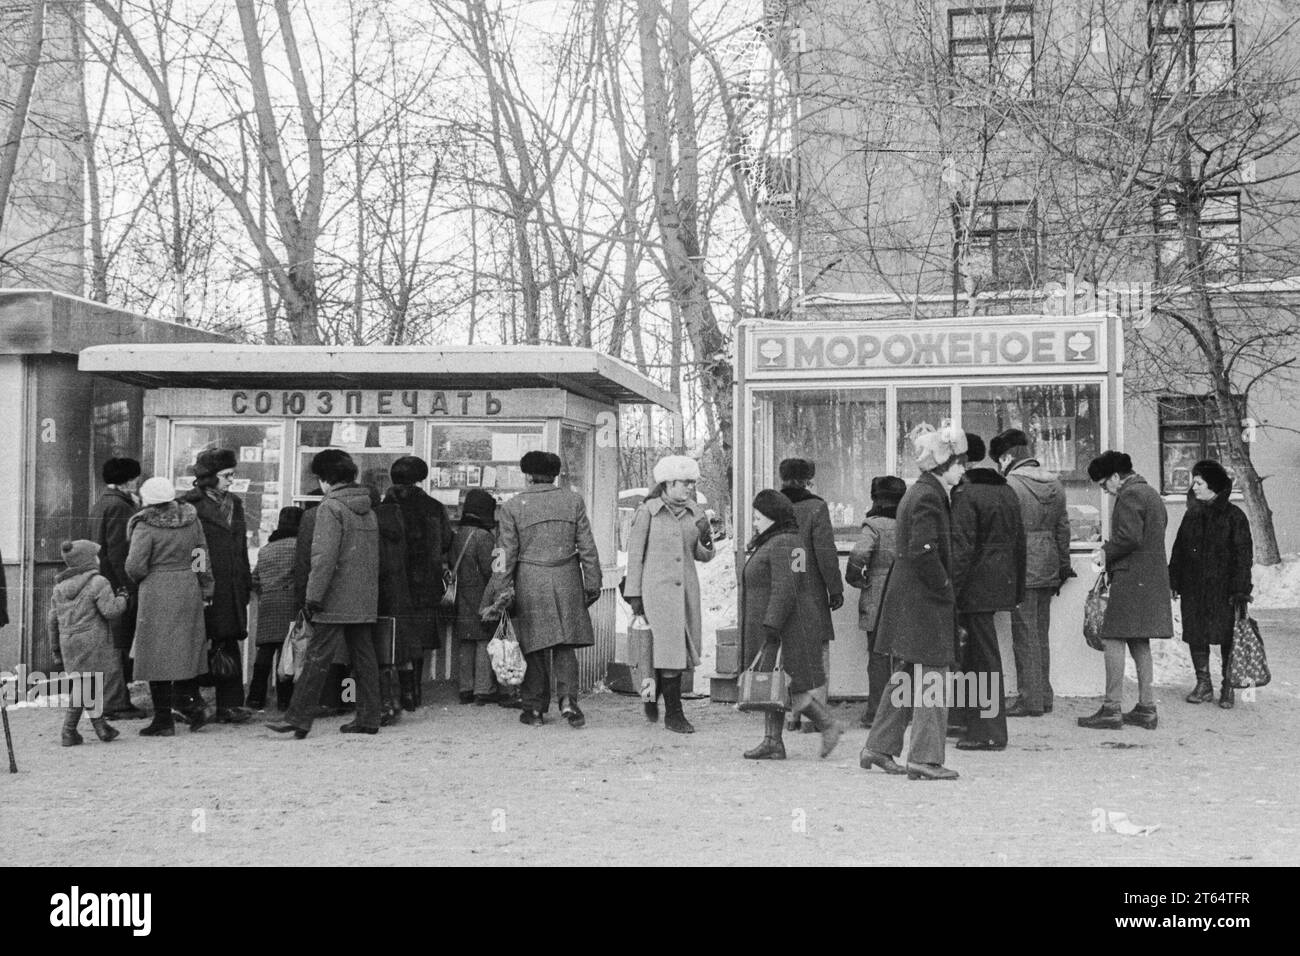 Moscow, USSR - Circa 1982: People by Press and Ice Cream kiosks by Shchukinskaya metro station. Black and white film scan Stock Photo